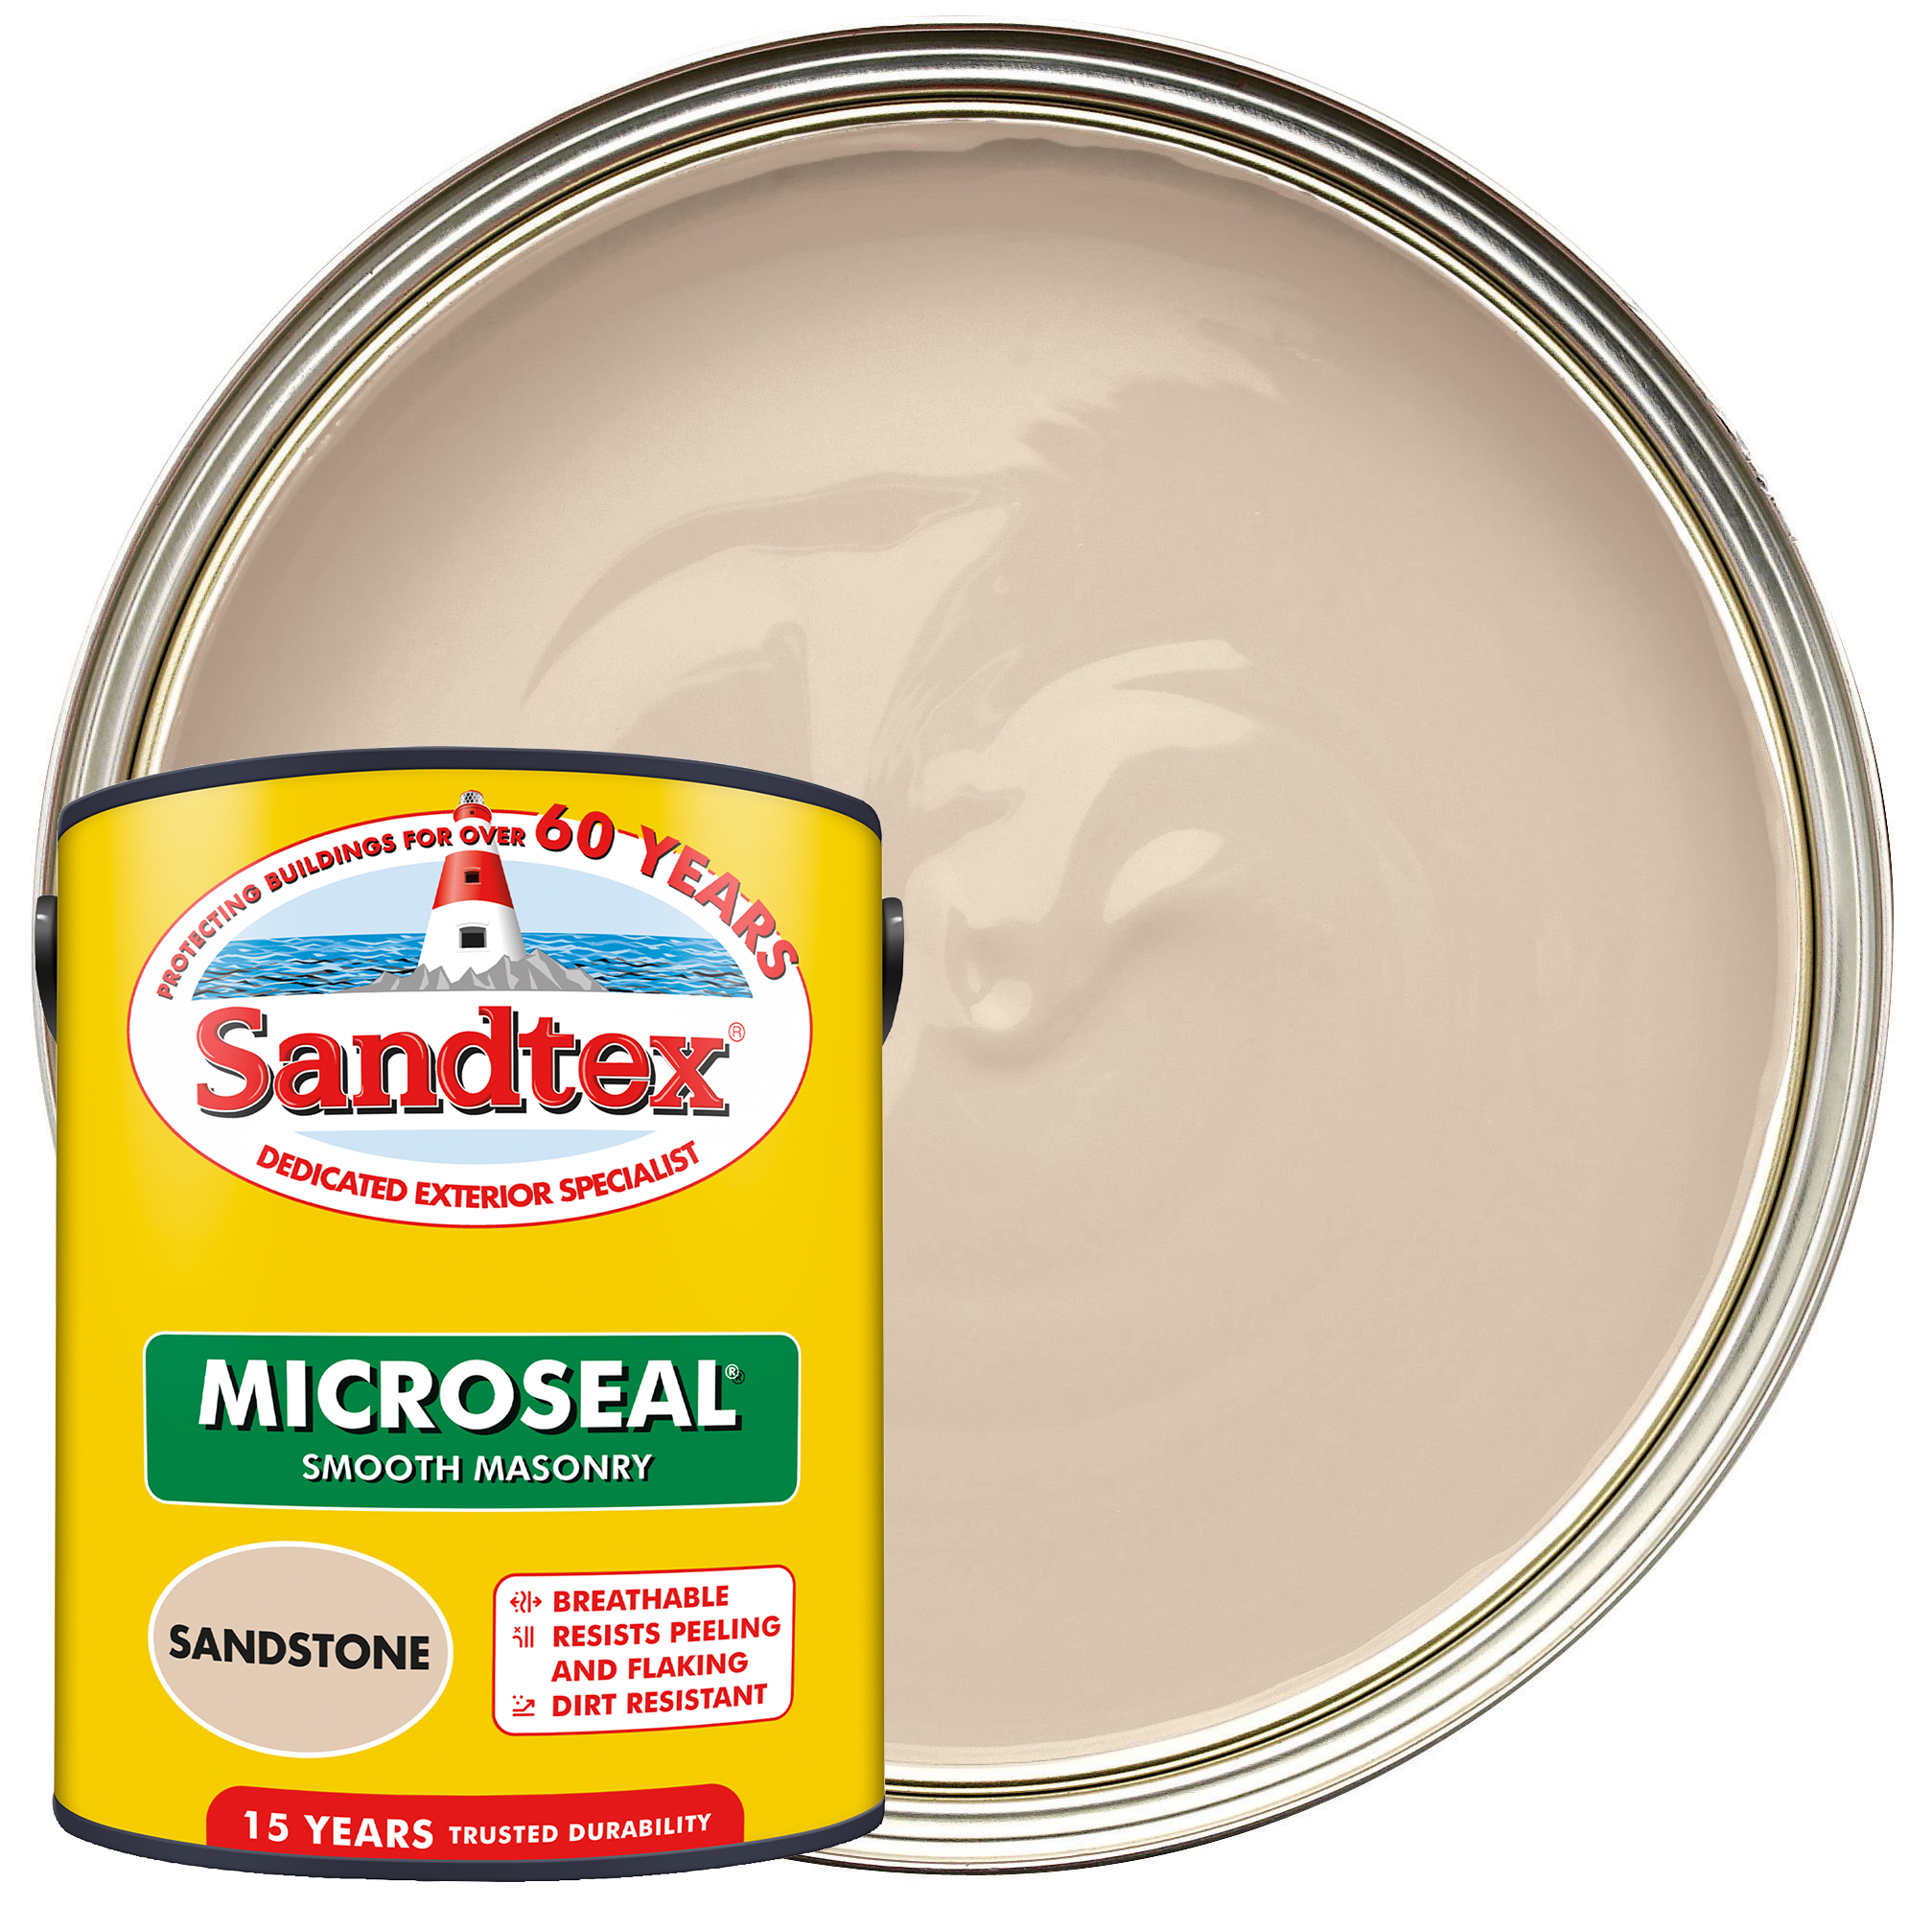 Image of Sandtex Microseal Ultra Smooth Weatherproof Masonry 15 Year Exterior Wall Paint - Sandstone - 5L